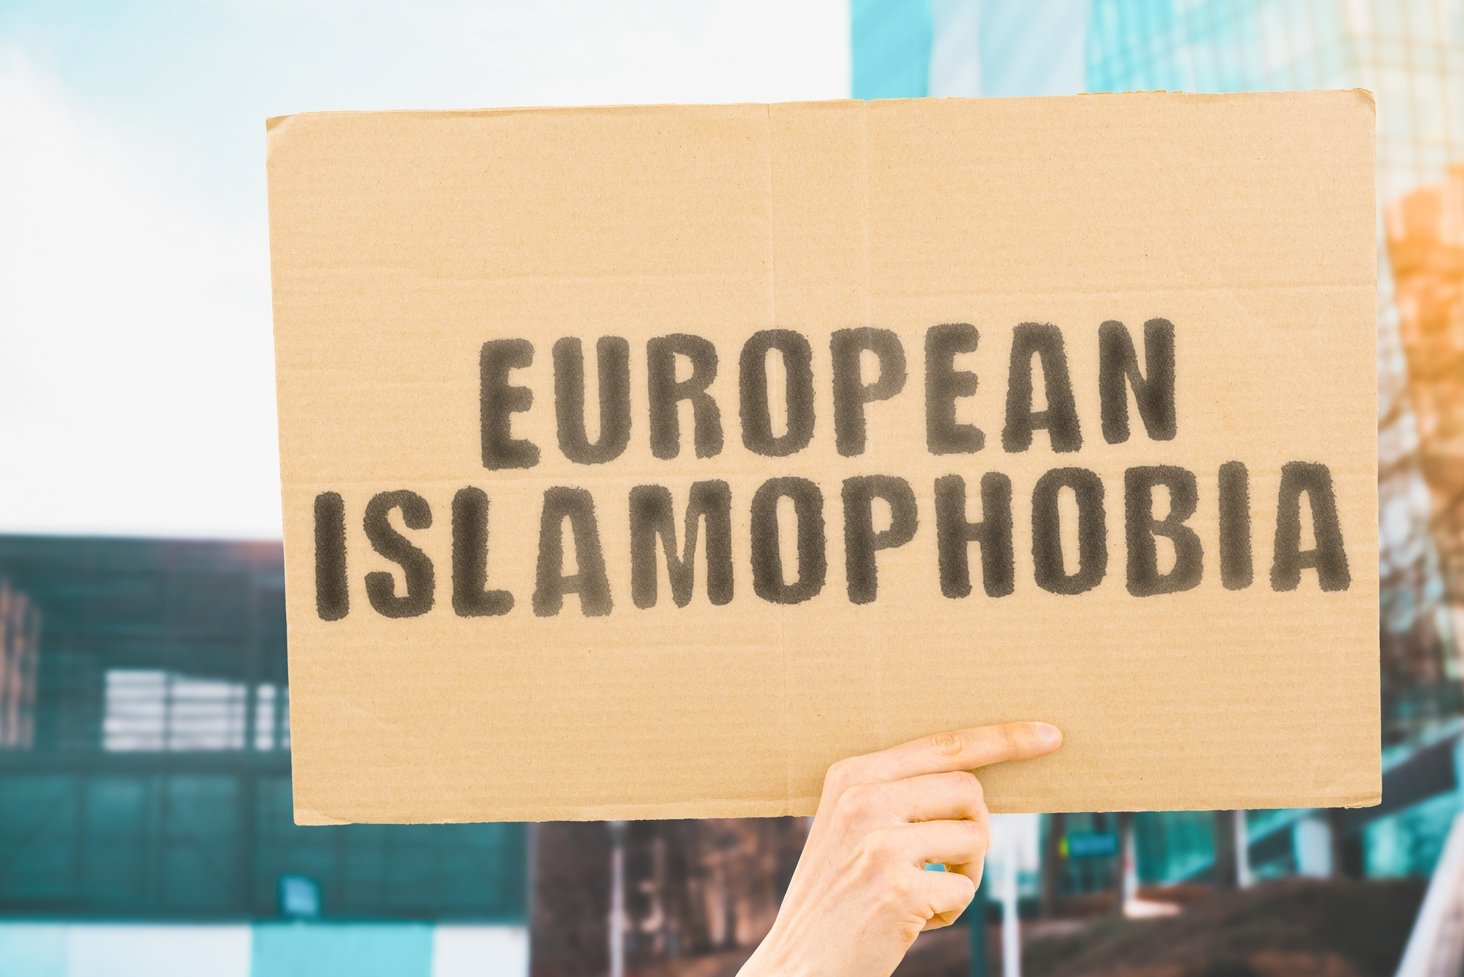 The phrase &quot;European Islamophobia&quot; on a banner in a men&#039;s hand. (Shutterstock)